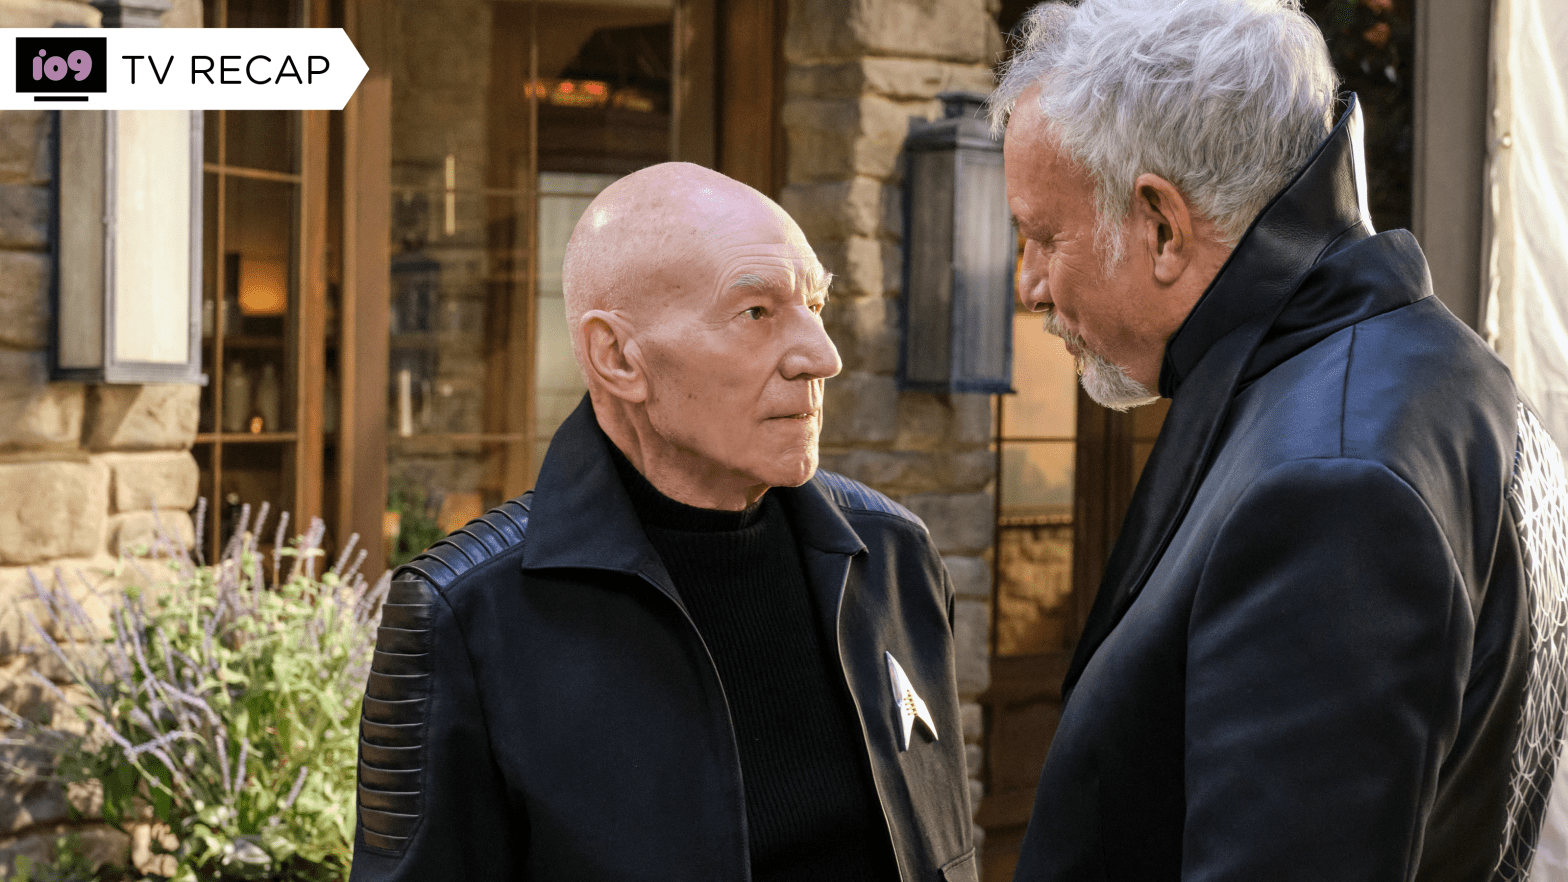 Jean-Luc confronts an old frenemy. (Image: Paramount)